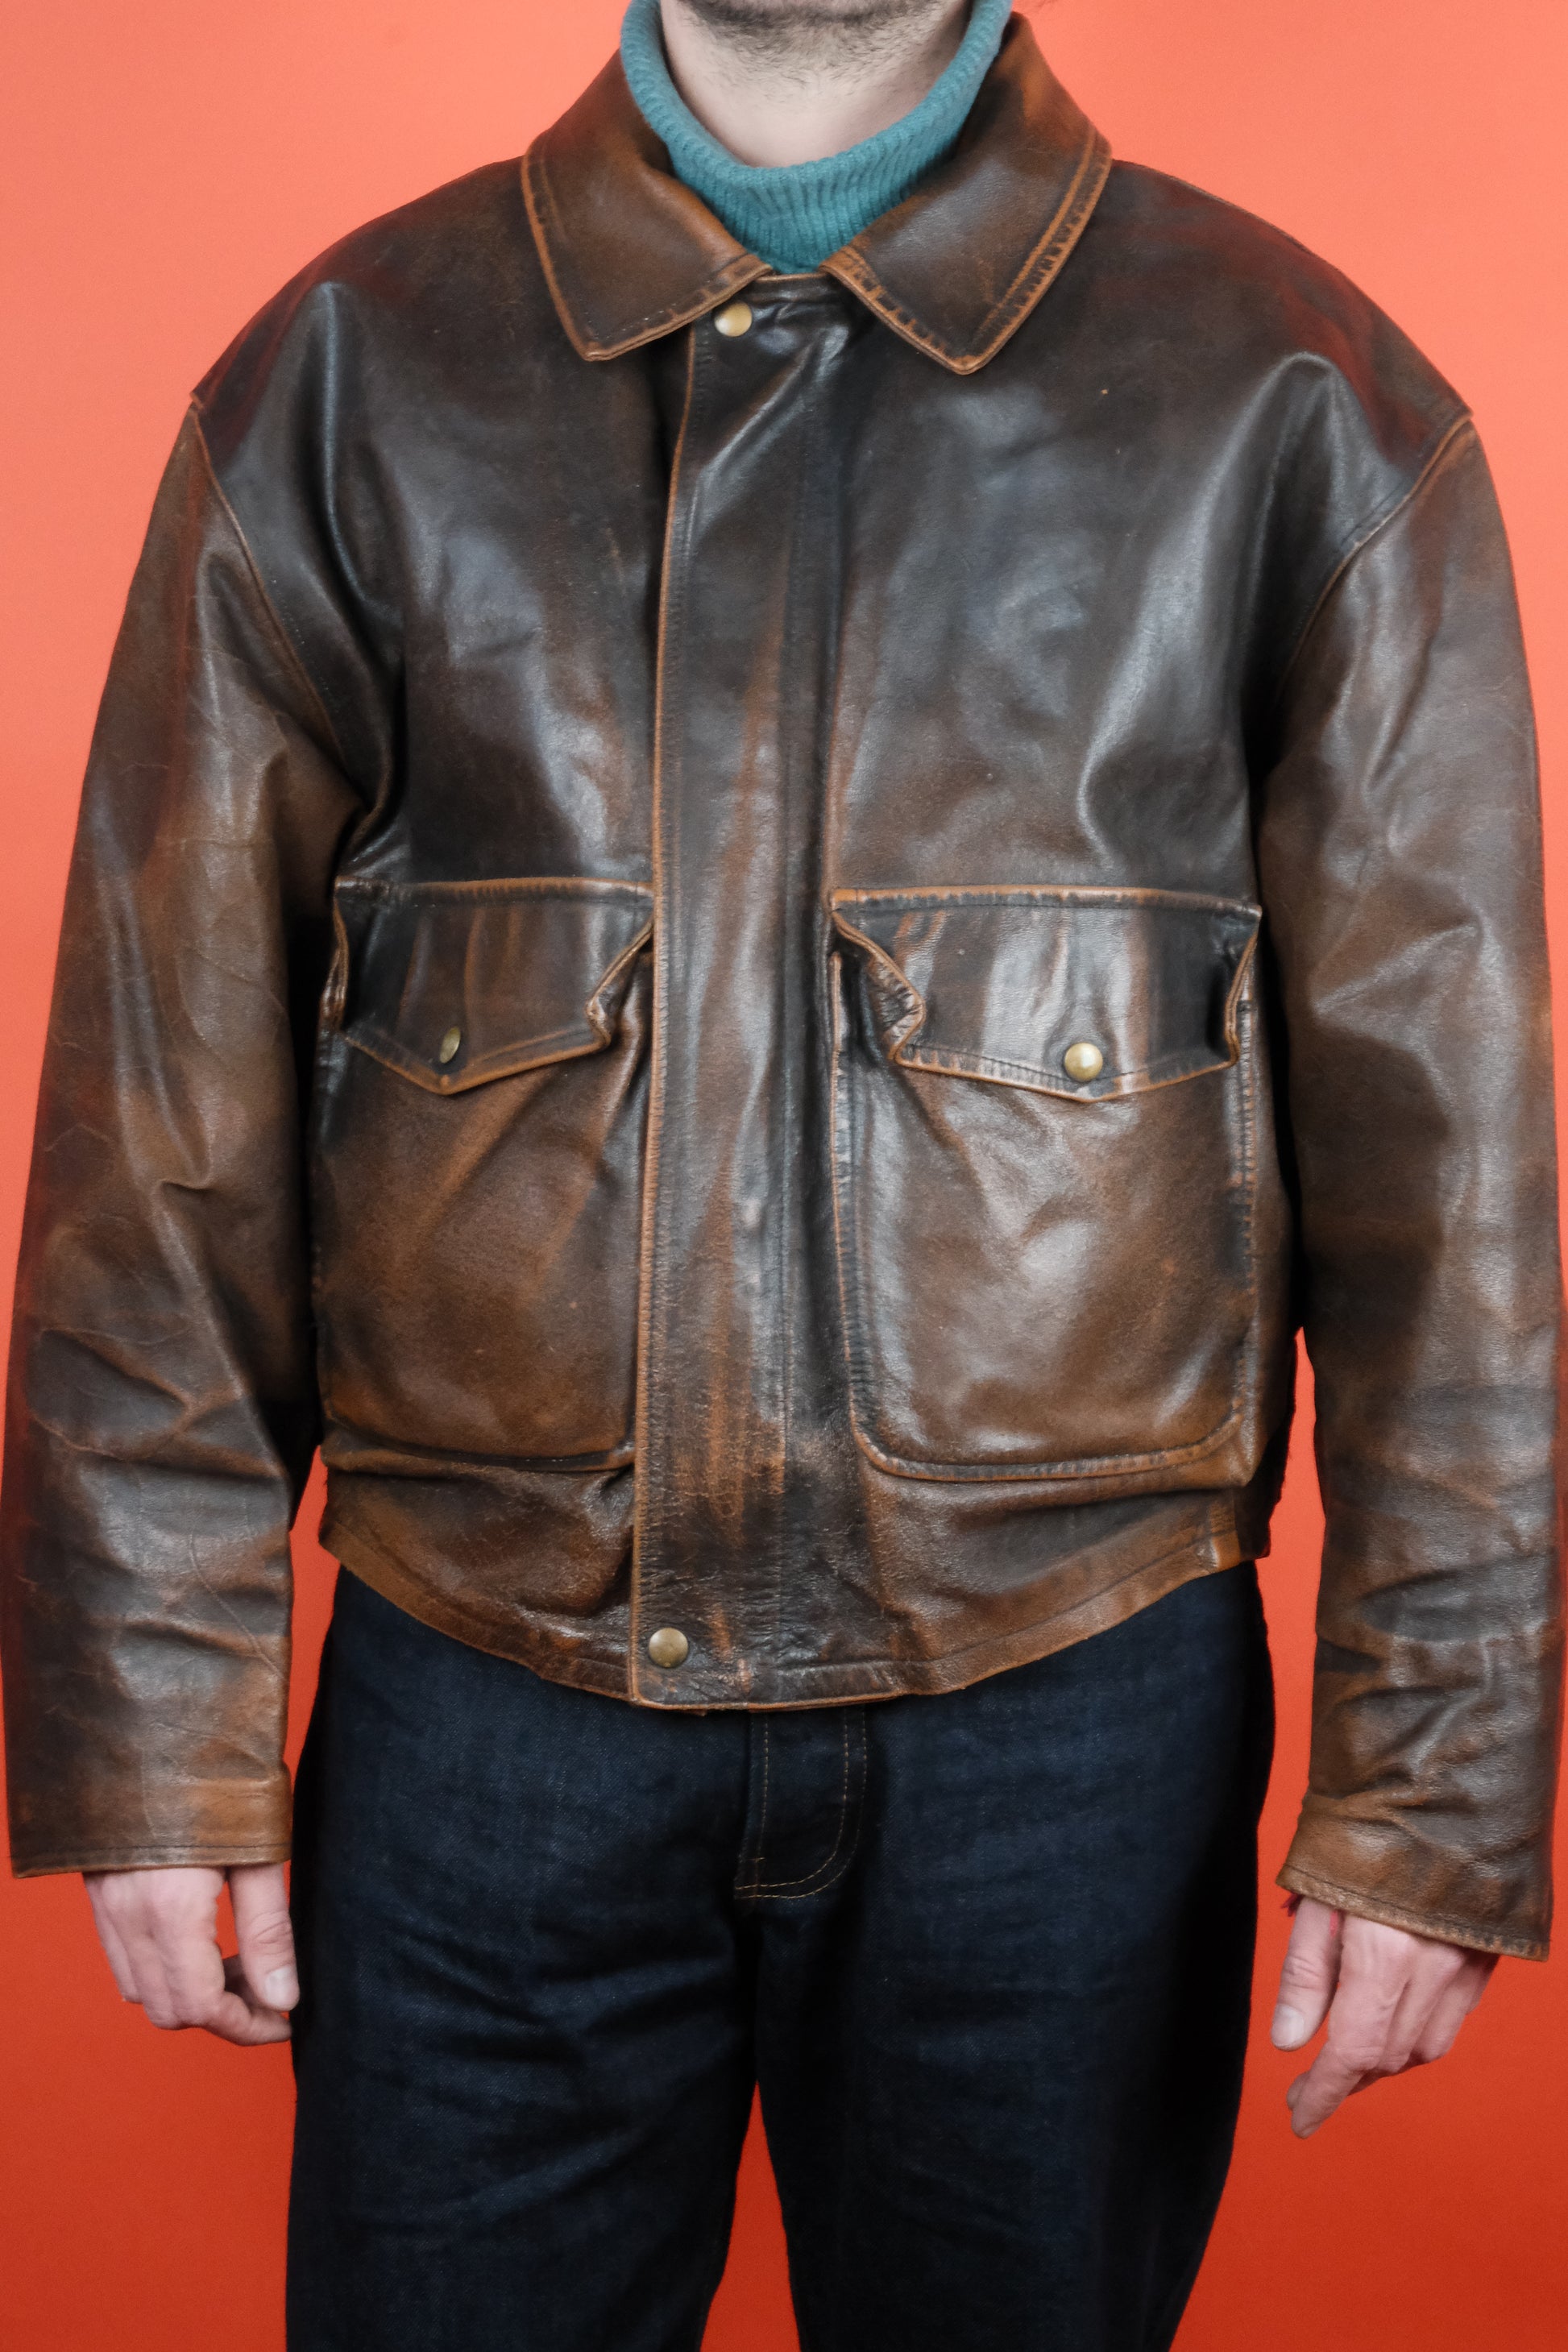 Polo Patina Brown Leather Jacket 'XL' - vintage clothing clochard92.com